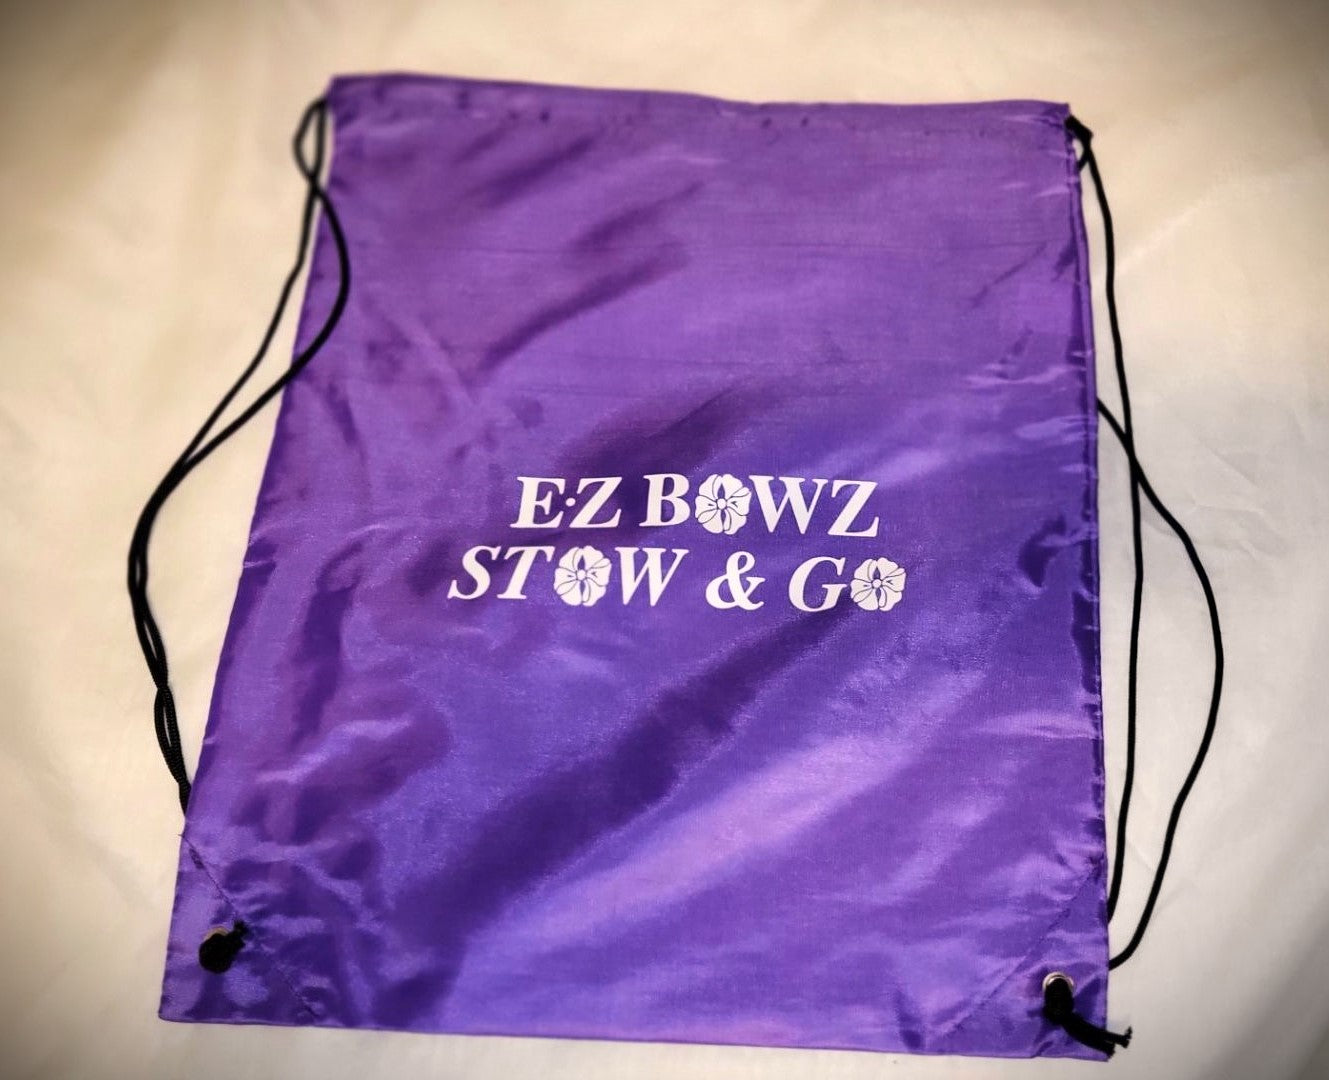 E-Z Bowz Stow & Go with matching Tote Bag